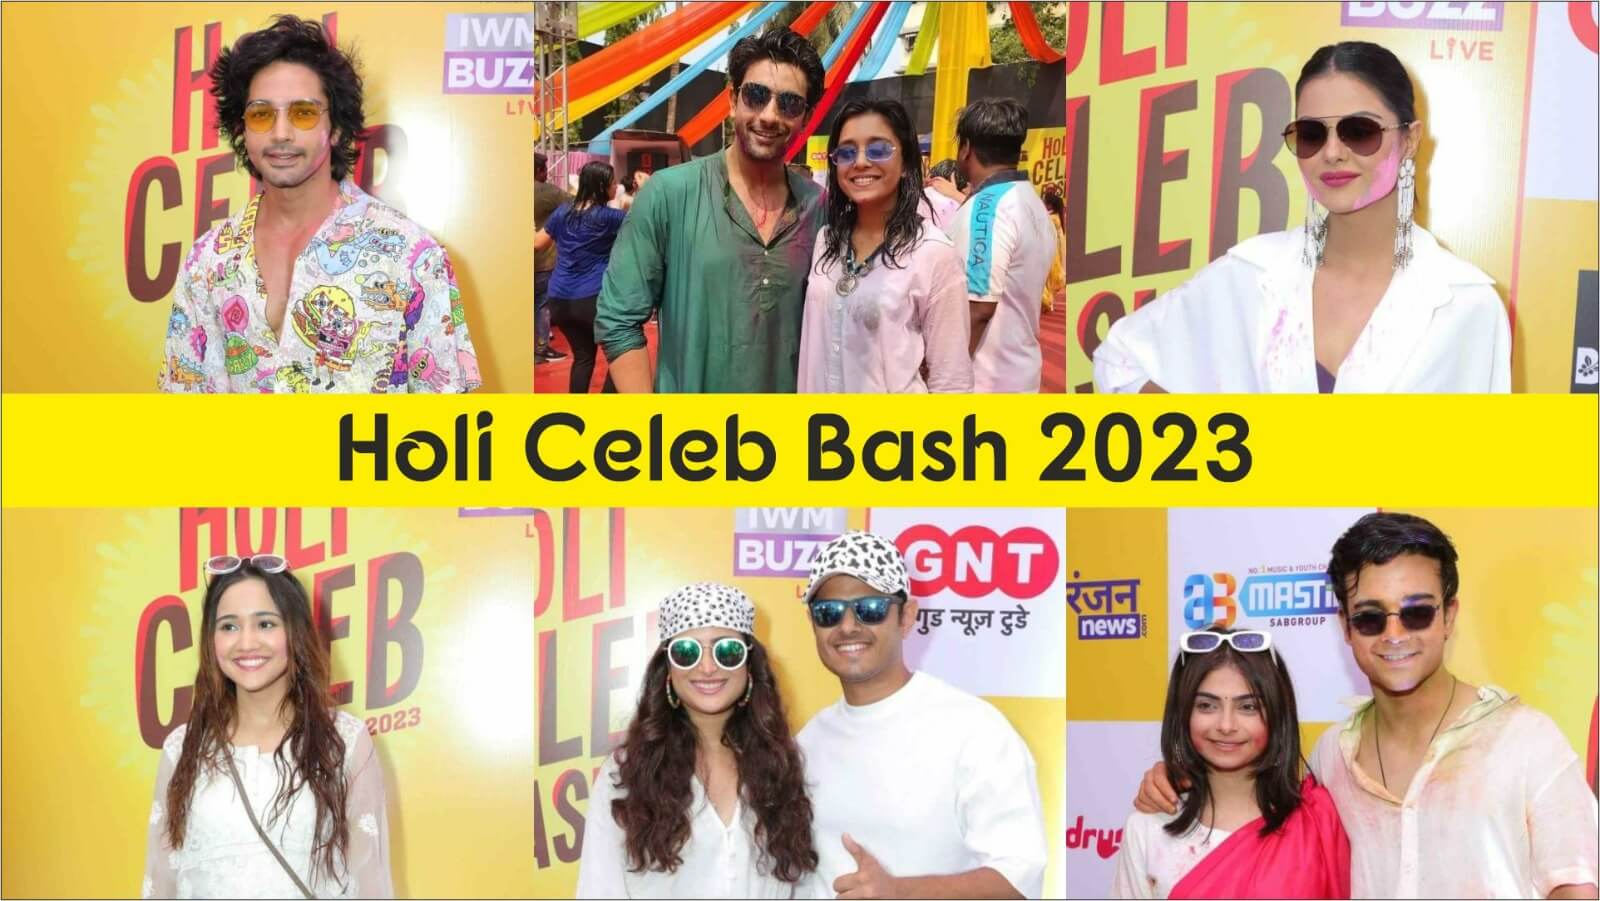 In Pics: Red Carpet of IWMBuzz Holi Celeb Bash 2023